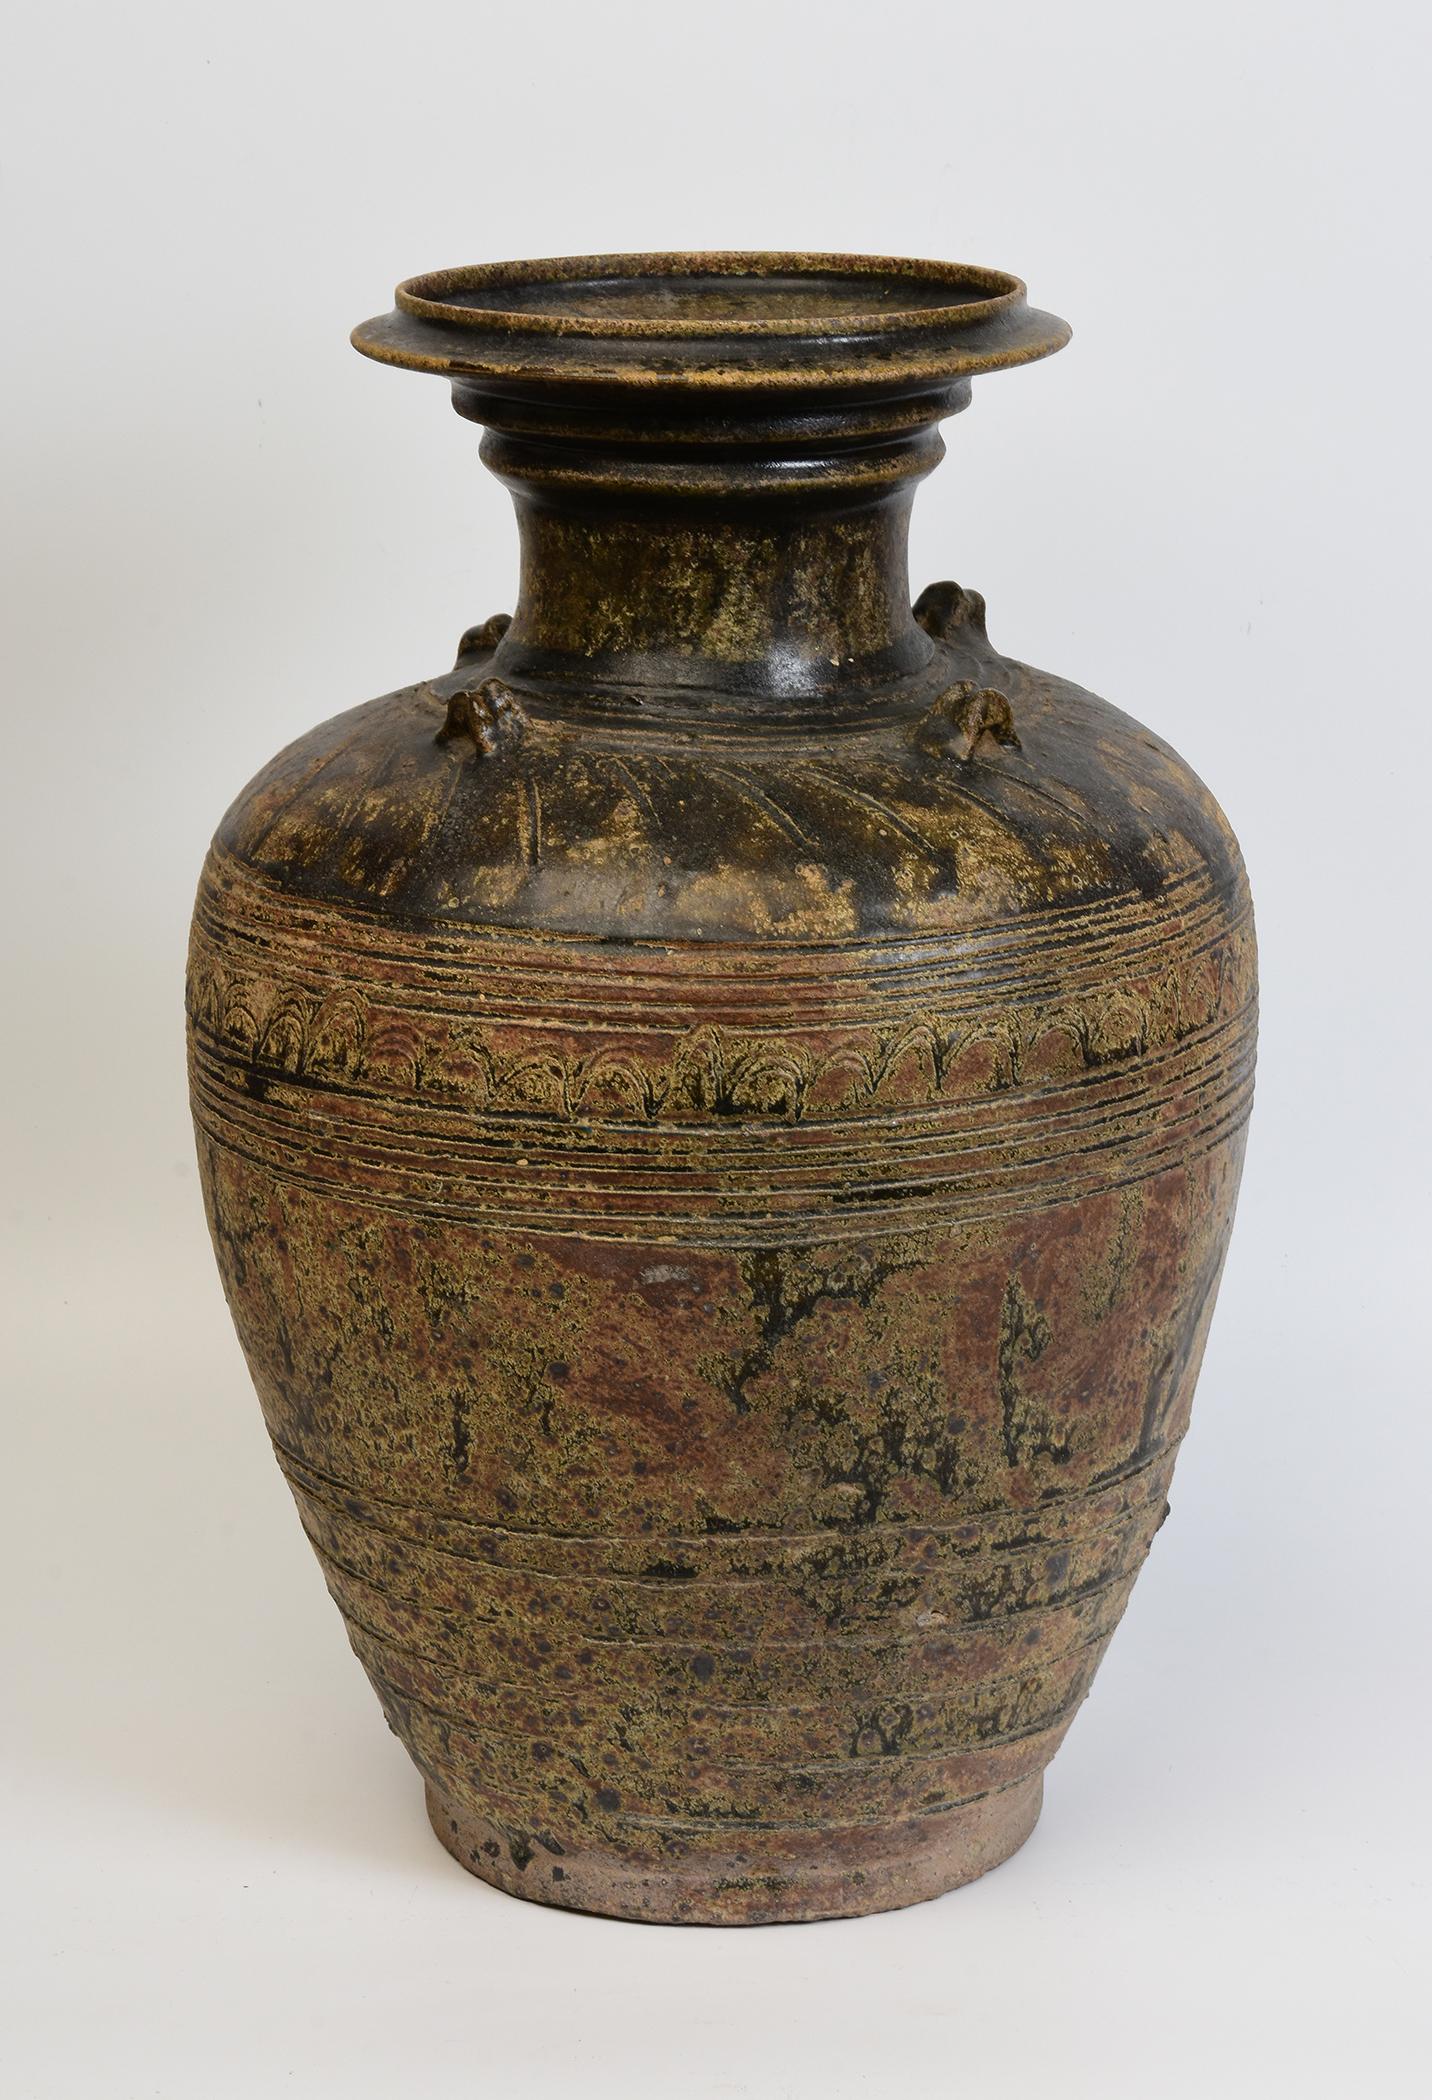 Antique Khmer dark-brown glazed pottery jar with flared mouth, decorated with carved band around the neck, encircled lines on the lower body and foot.

Age: Cambodia, Angkor Vat Period, 12th Century
Size: Height 47.5 C.M. / Width 30.5